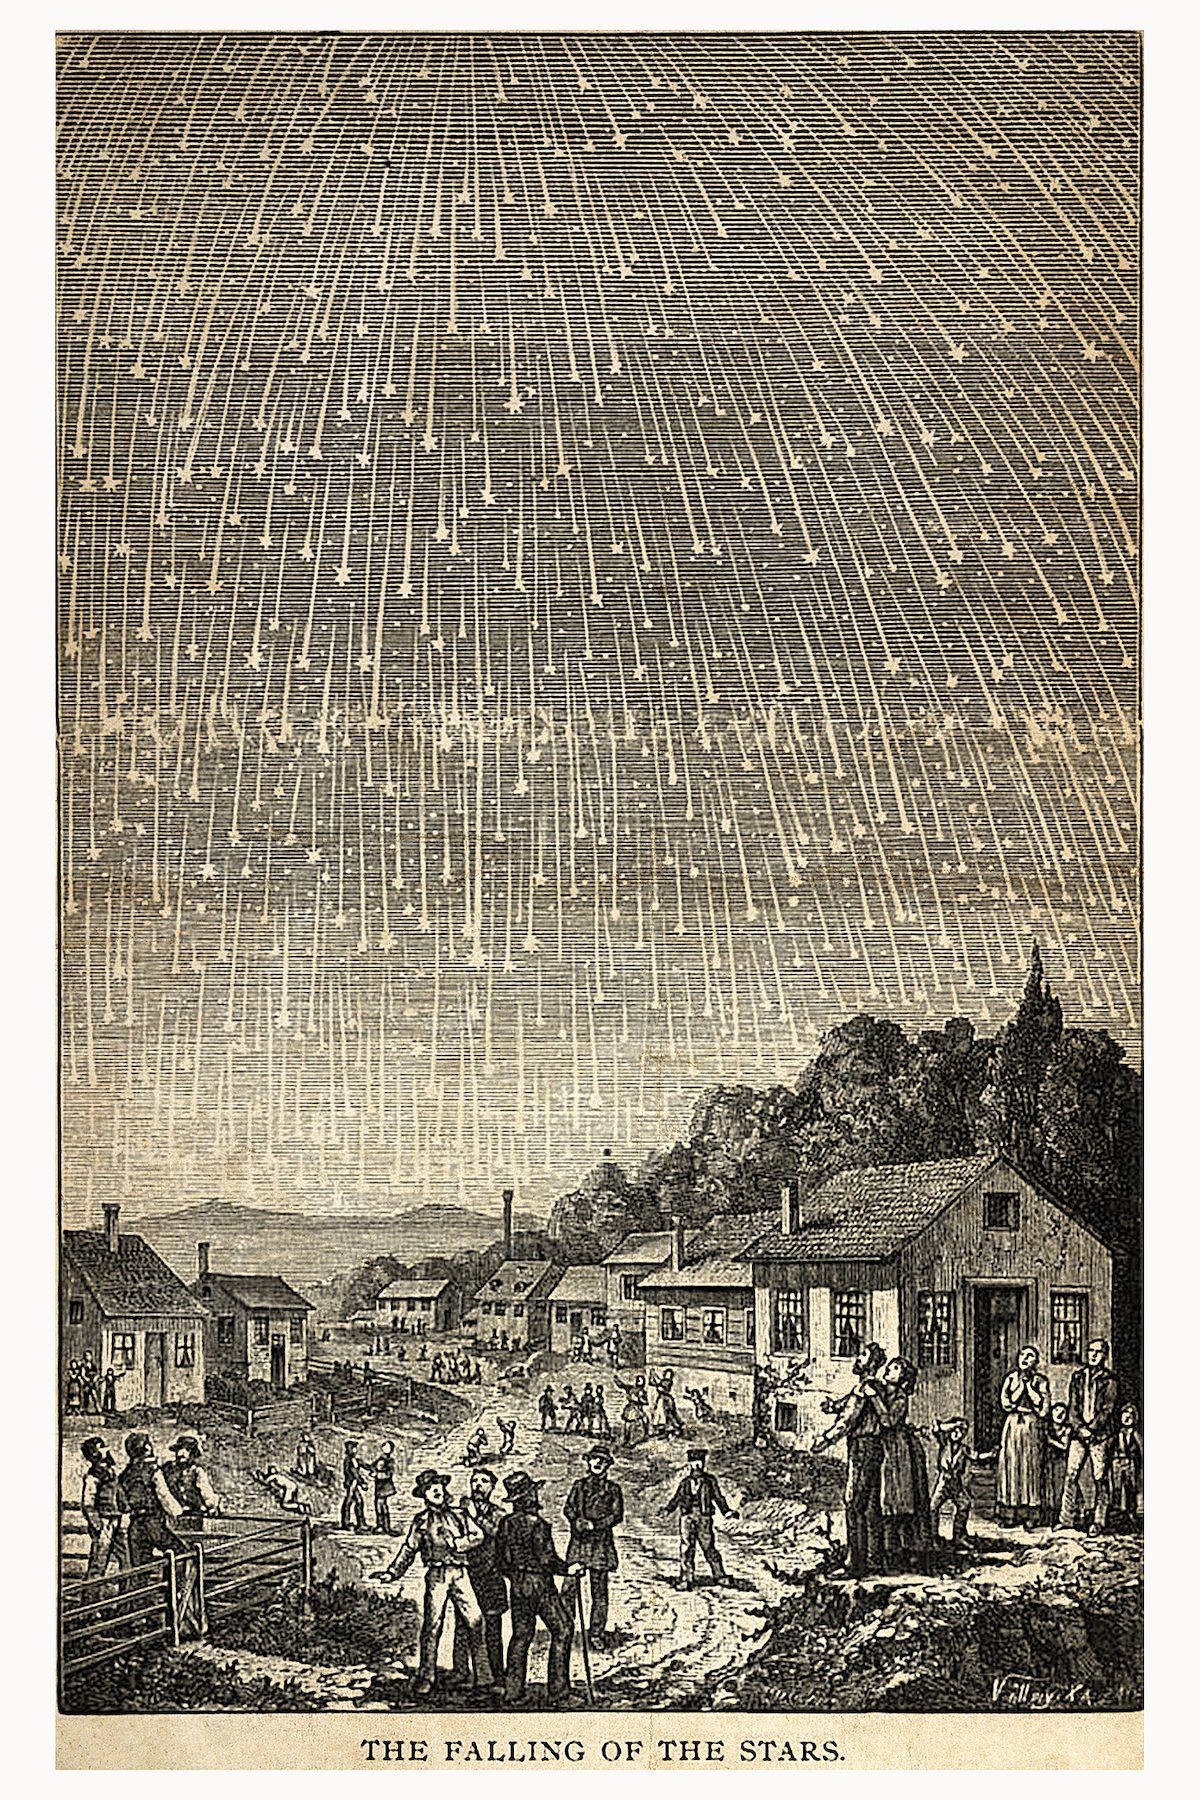 The falling of the stars. From Prophetic Lights by Ellet Joseph Waggoner, 1888.